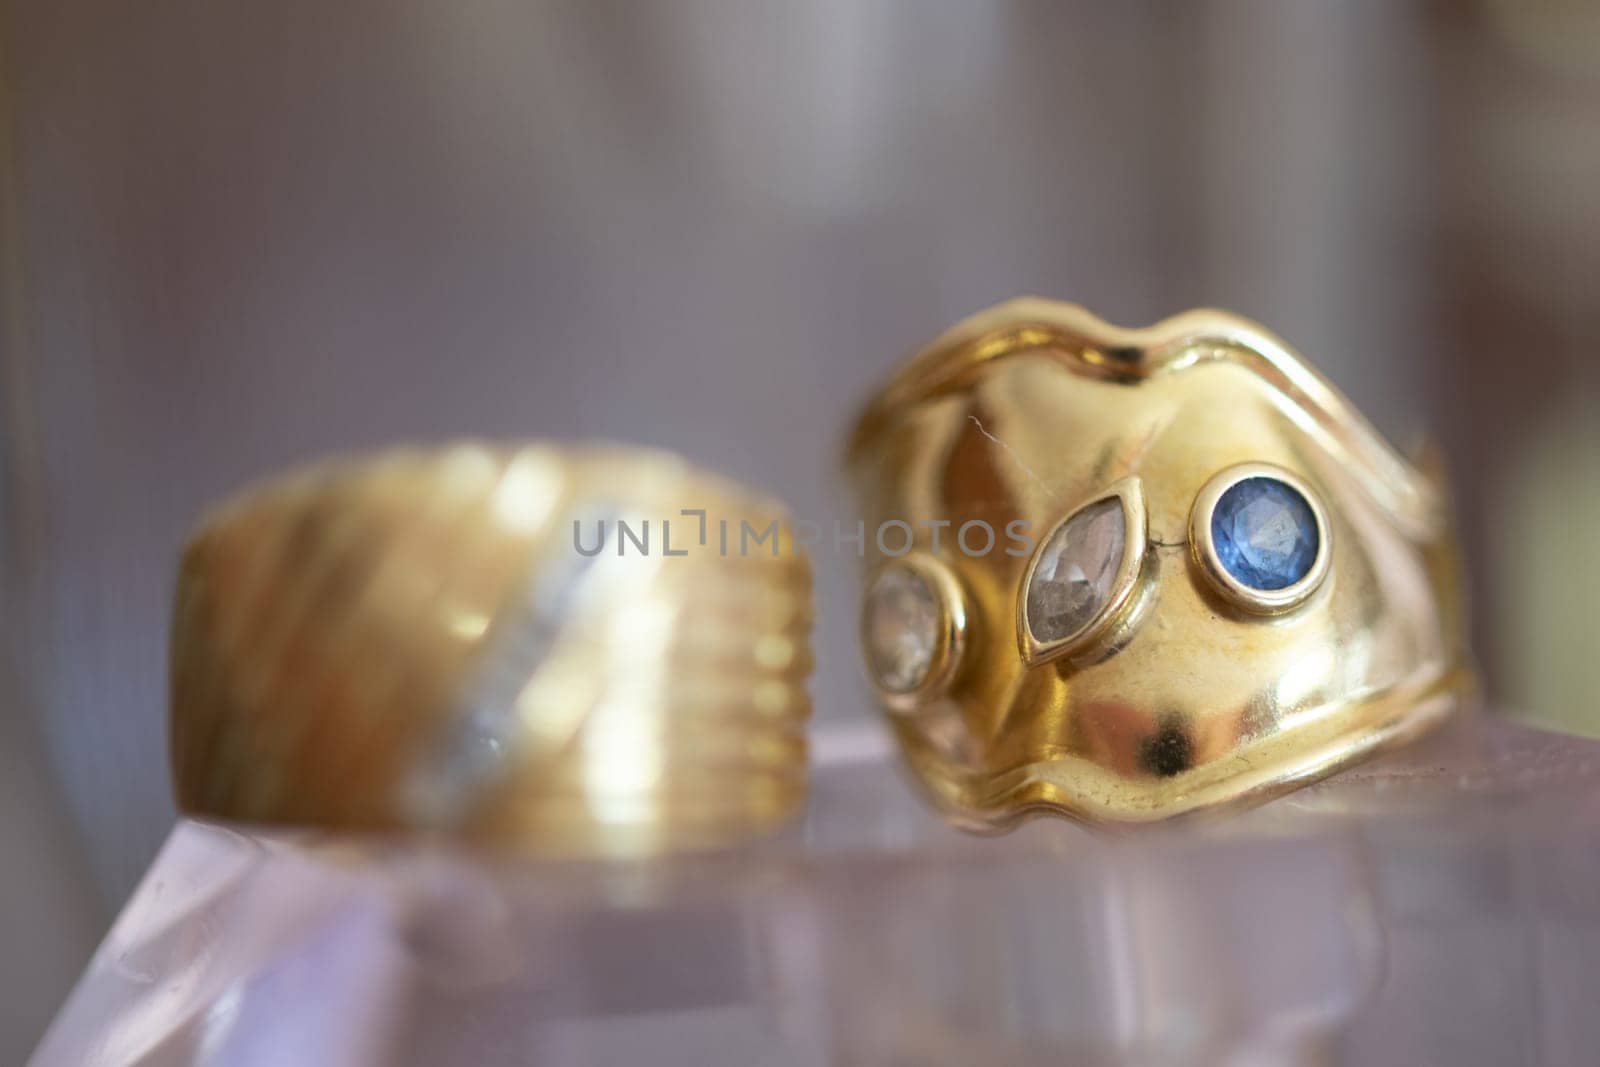 gold ring with precious stones view through glasses